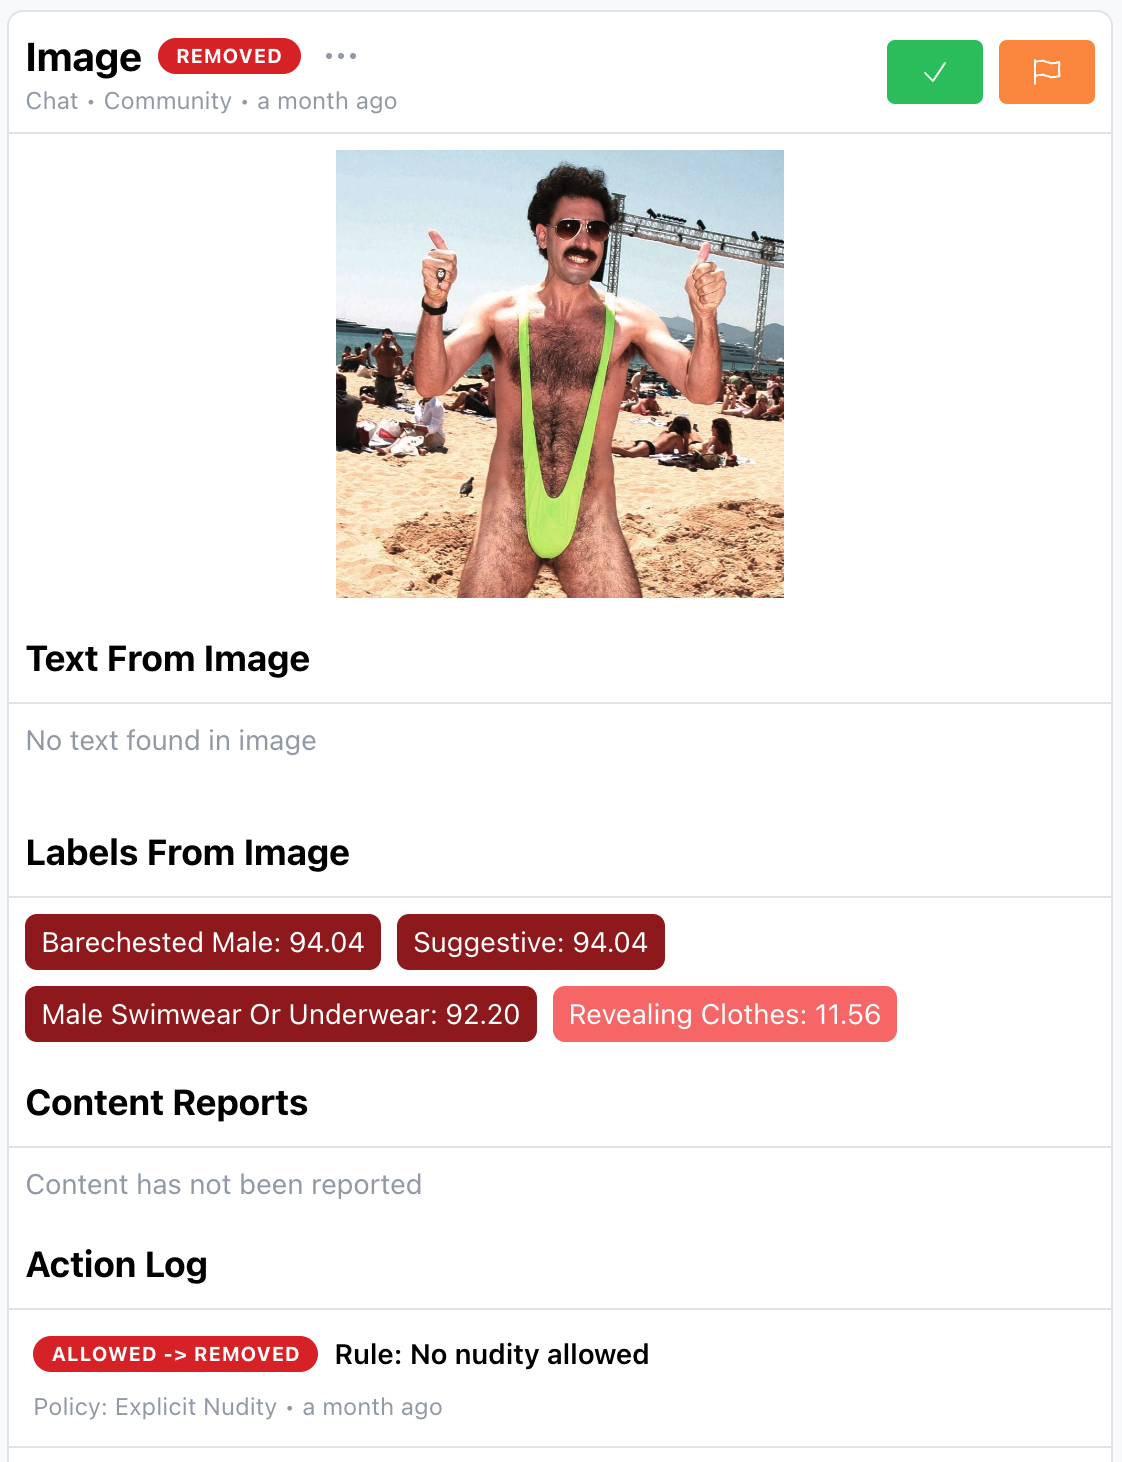 We automatically label images with potentially problematic content. You can customize your rules to automatically flag/remove images with nudity/violence/drugs/weapons/etc.